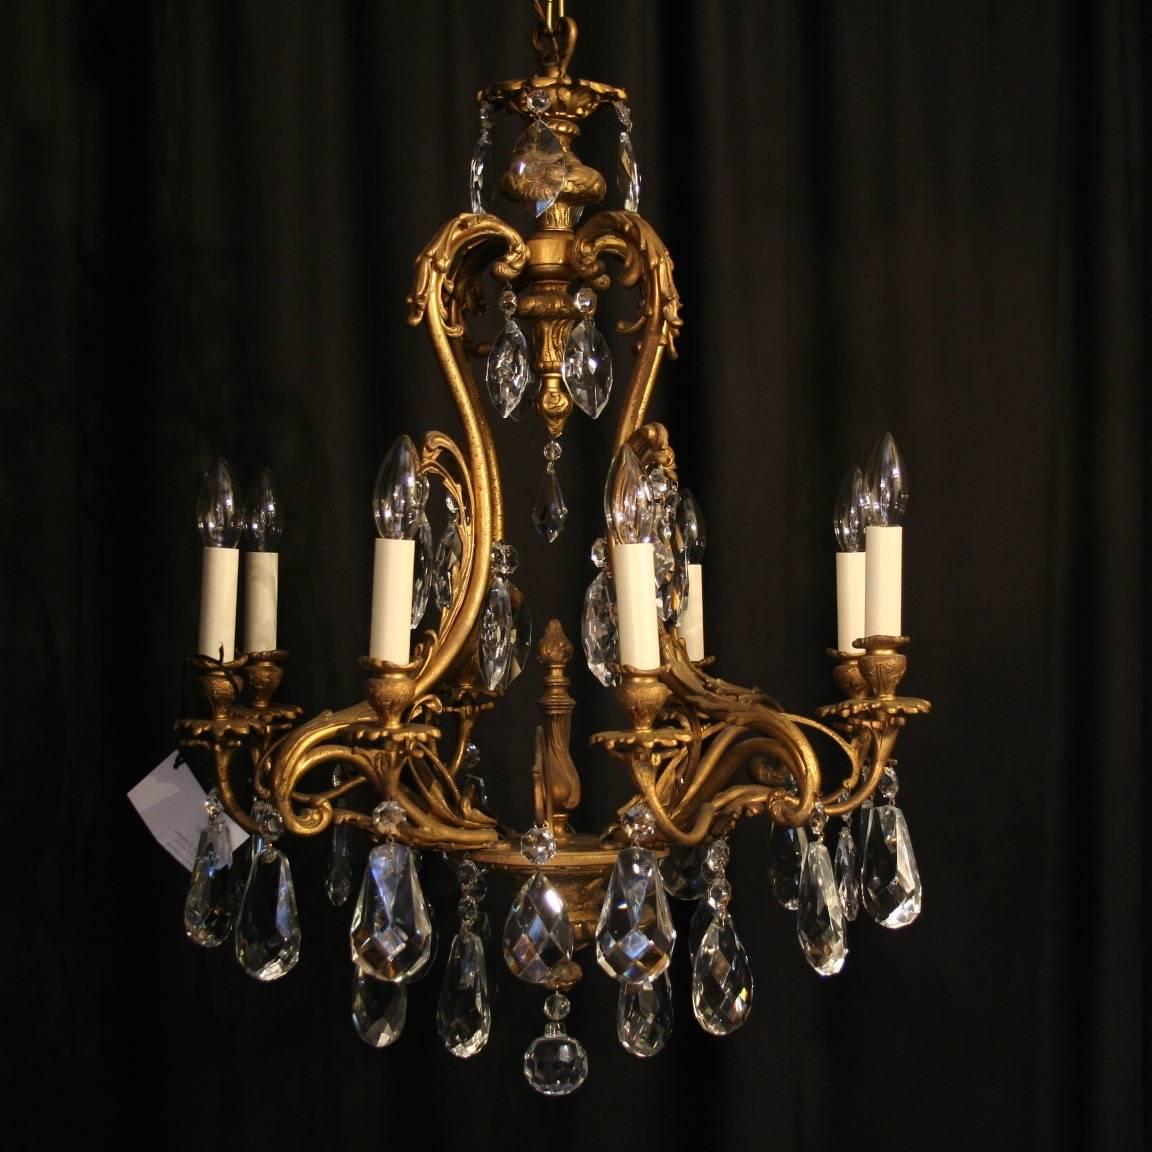 An ornate Italian gilded cast bronze and crystal eight and six-light cage form antique chandeliers, the scrolling arms with foliated leaf bobeches drip pans and leaf bulbous candle sconces, issuing from an Acanthus leaf cage form interior with a